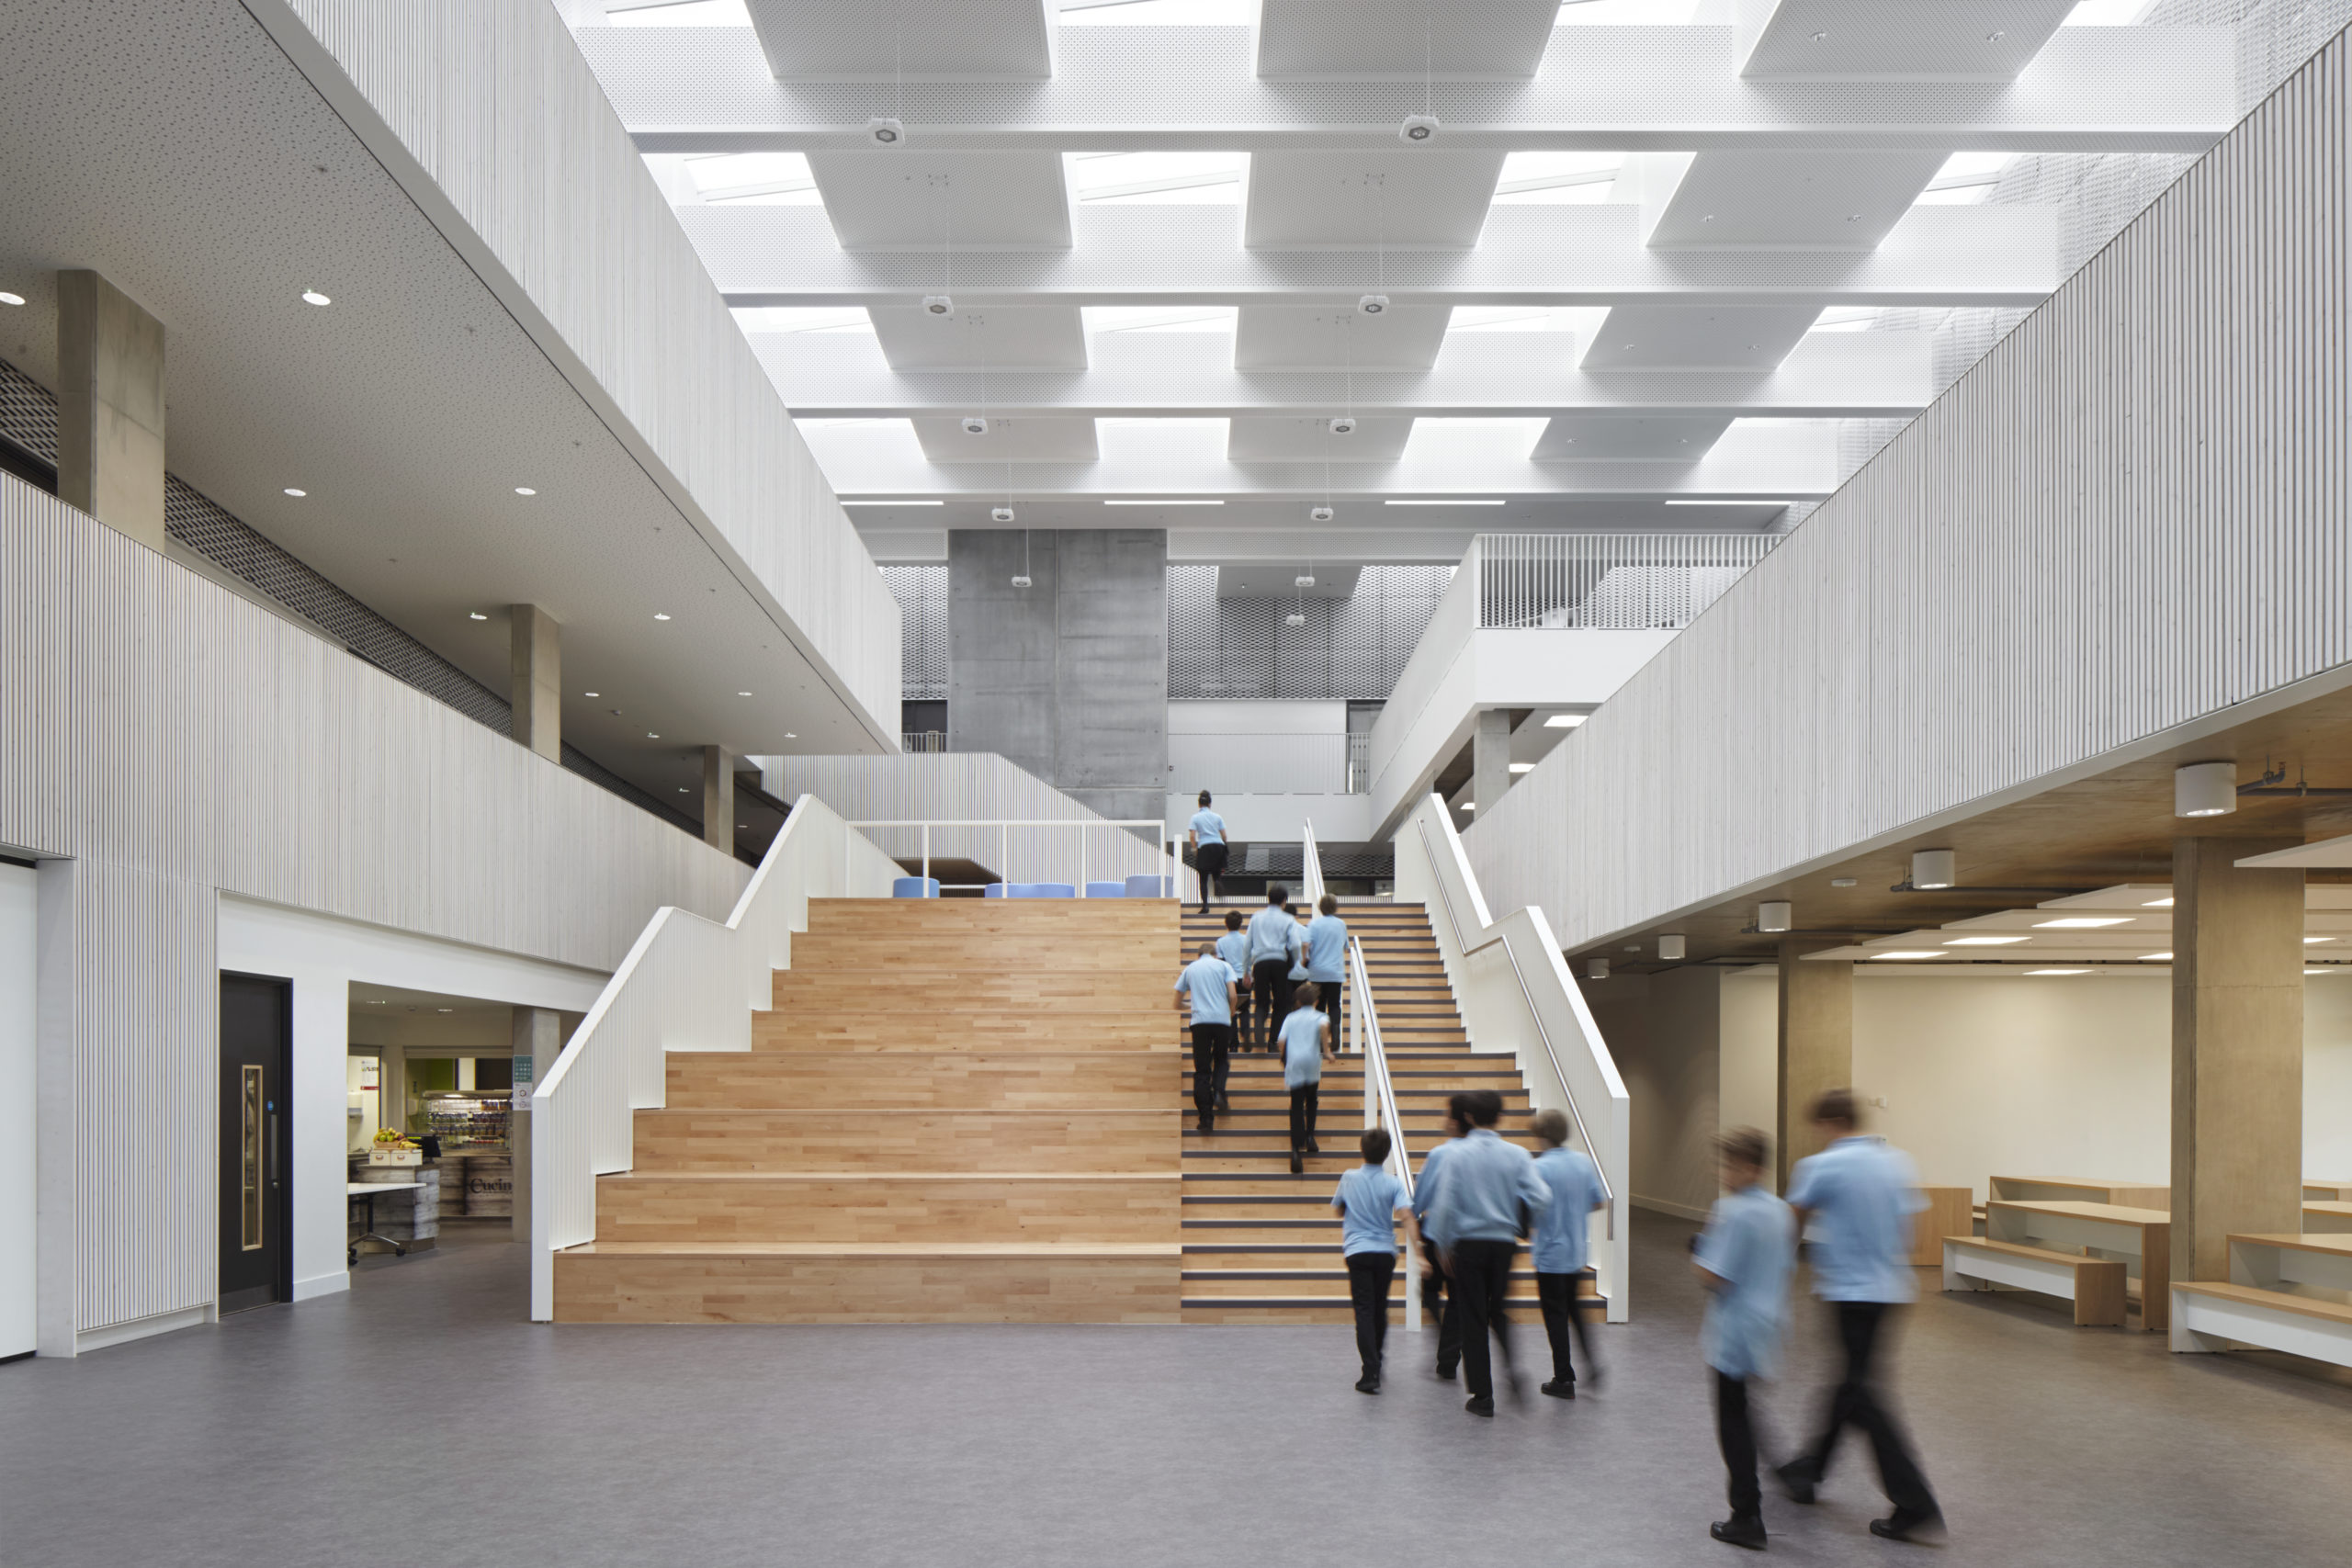 Why is natural light so important in school design? | Construction Magazine